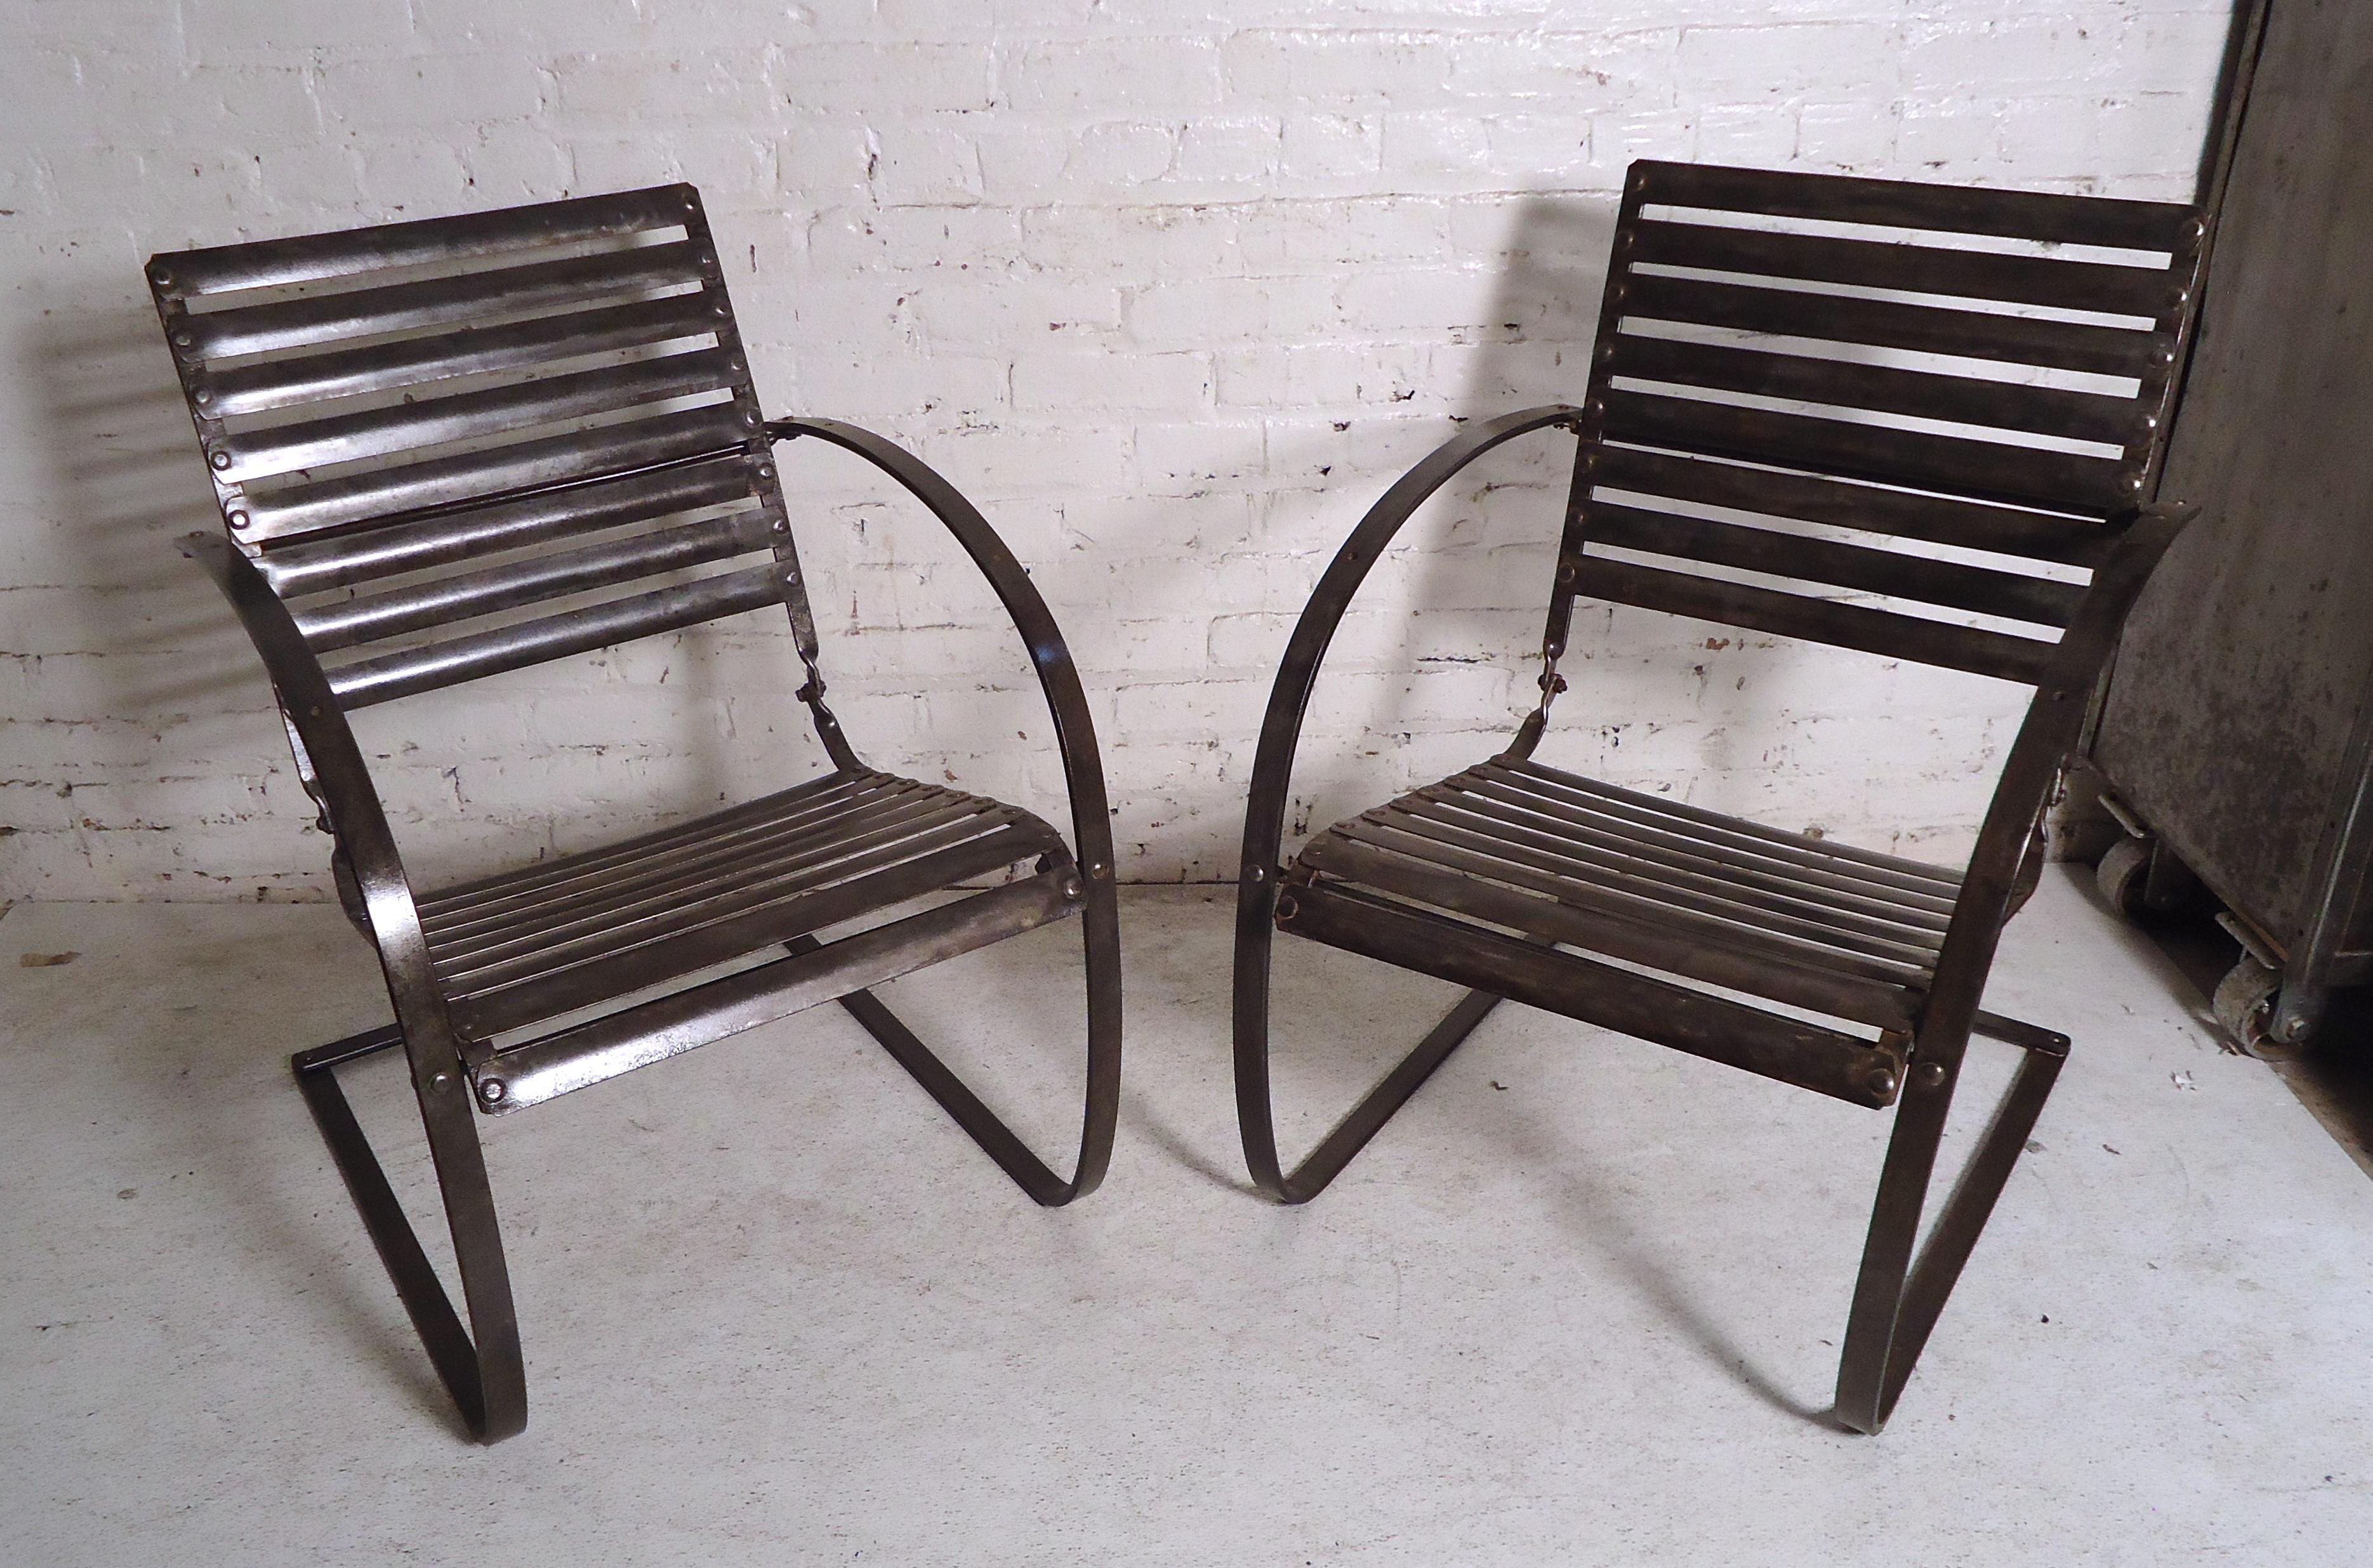 20th Century Pair of Vintage Industrial Spring Chairs